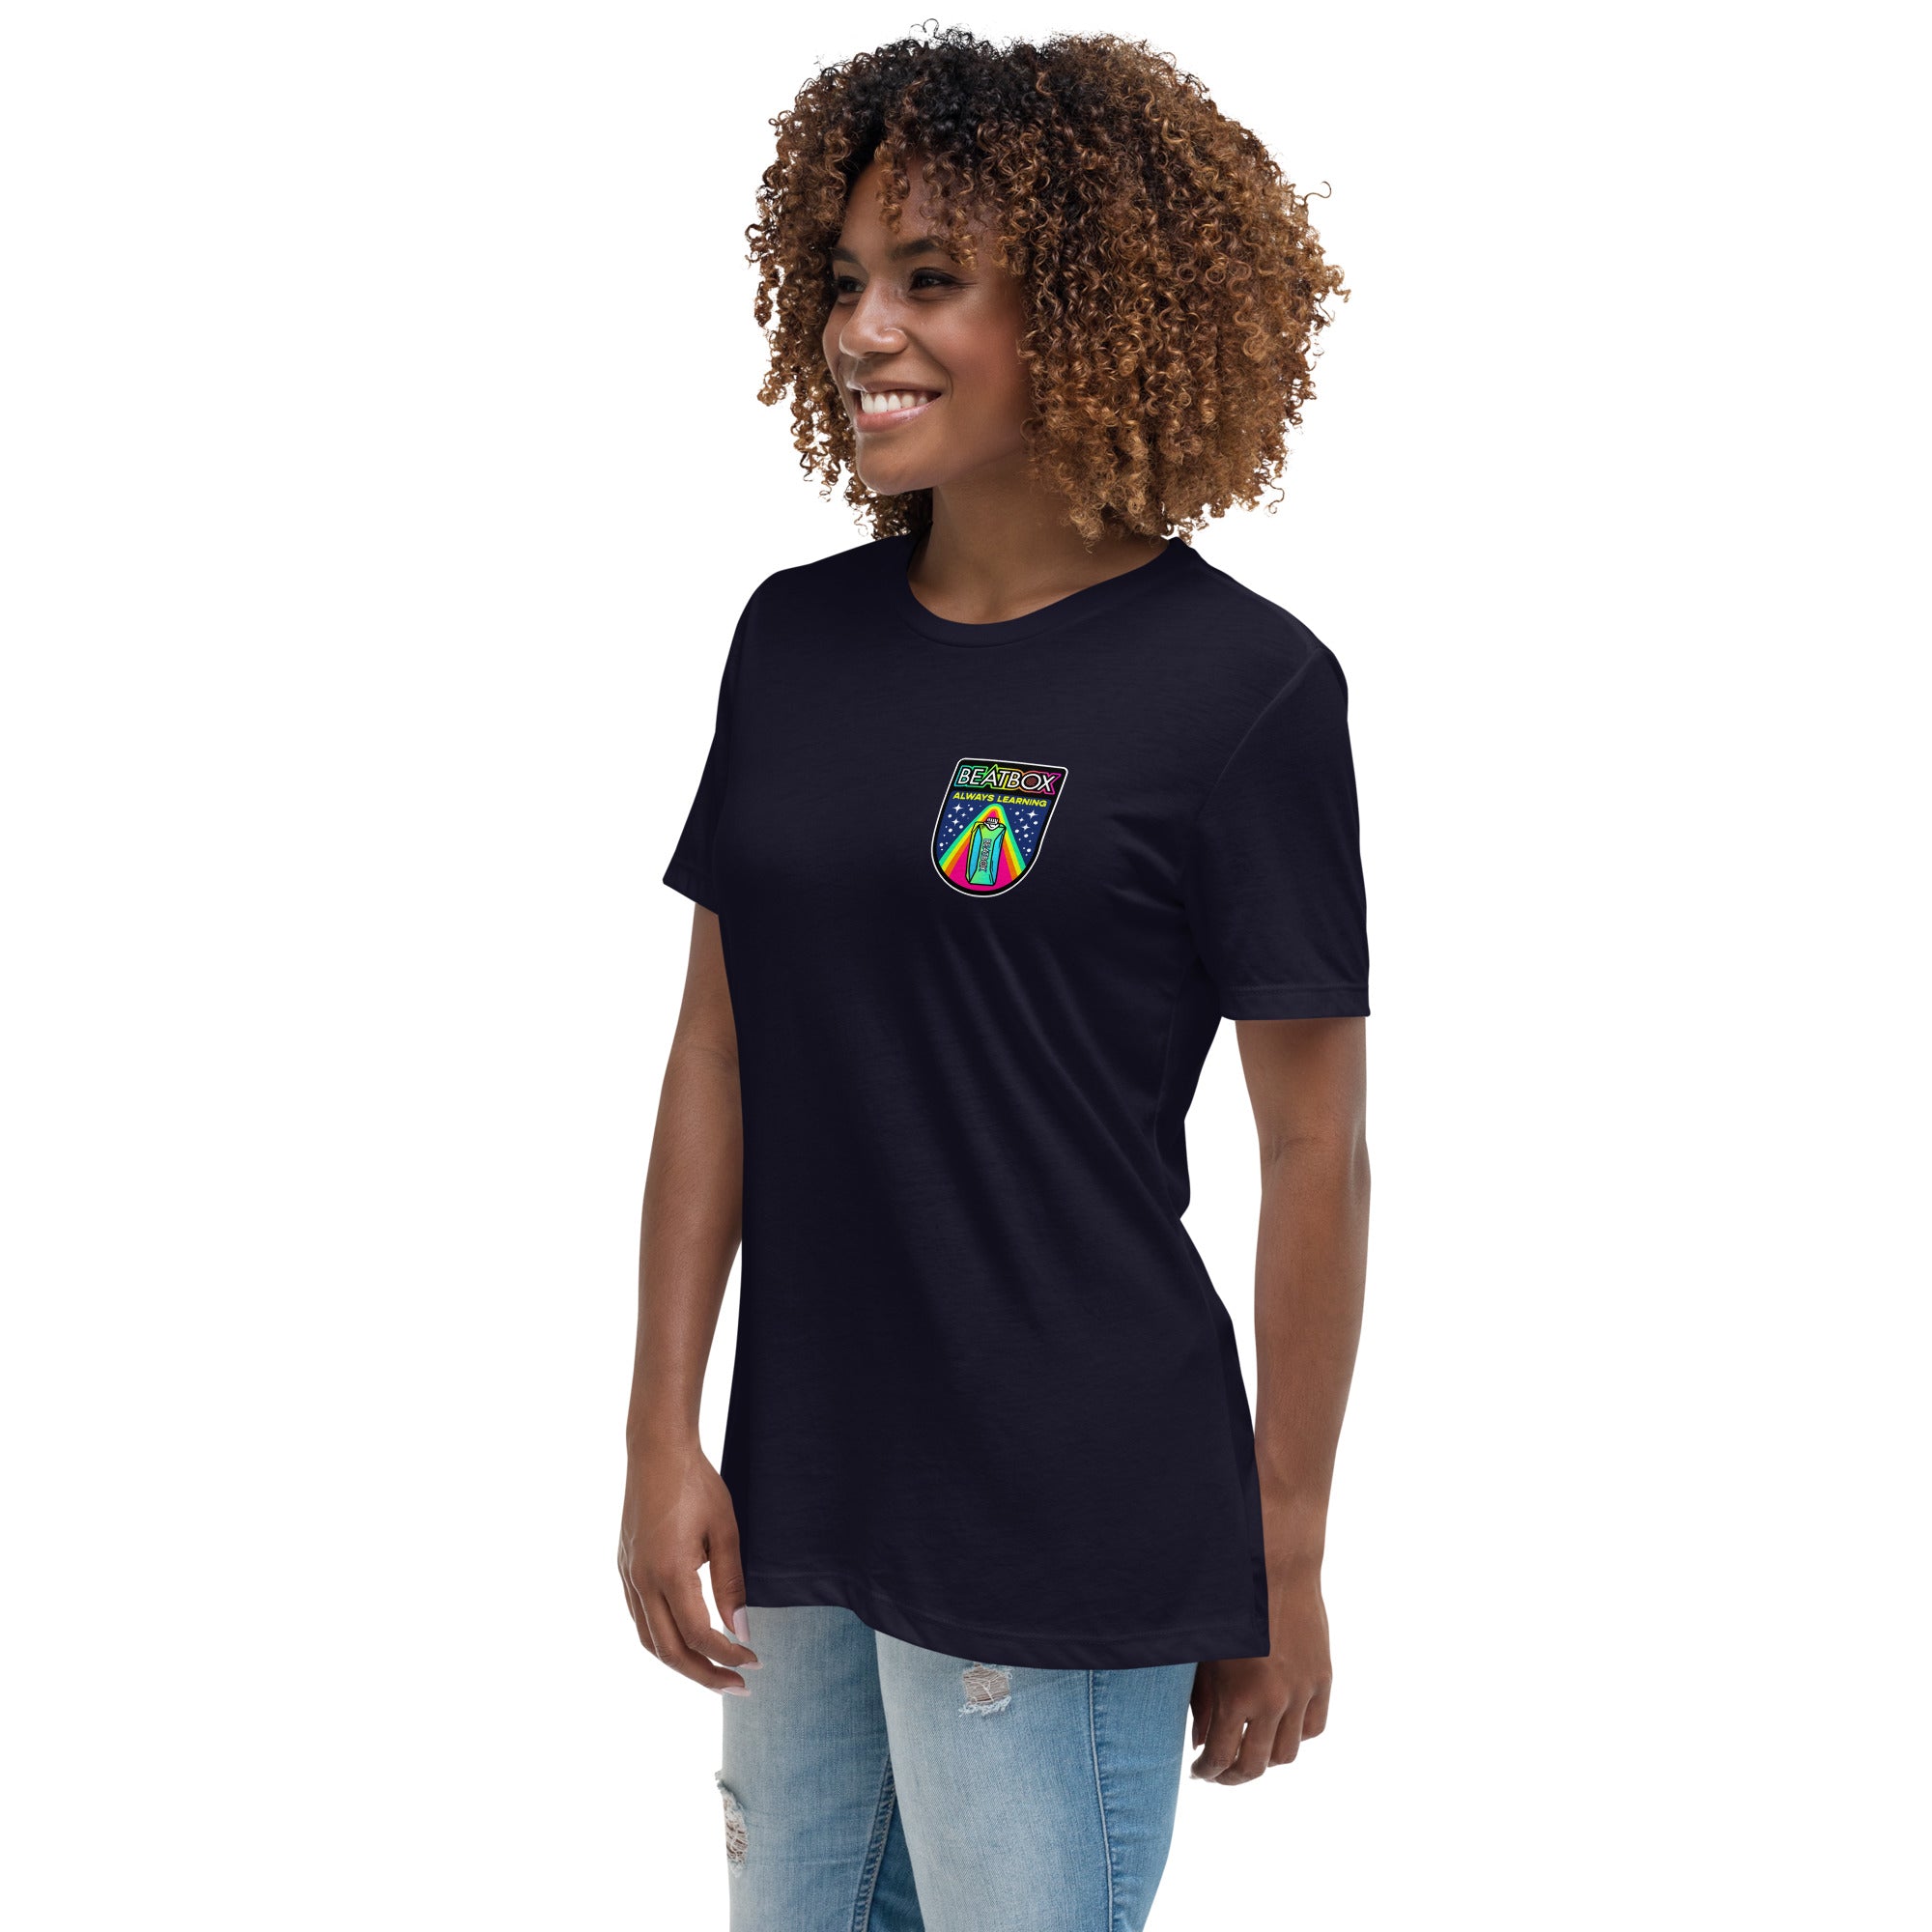 Always Learning Women's Relaxed T-Shirt